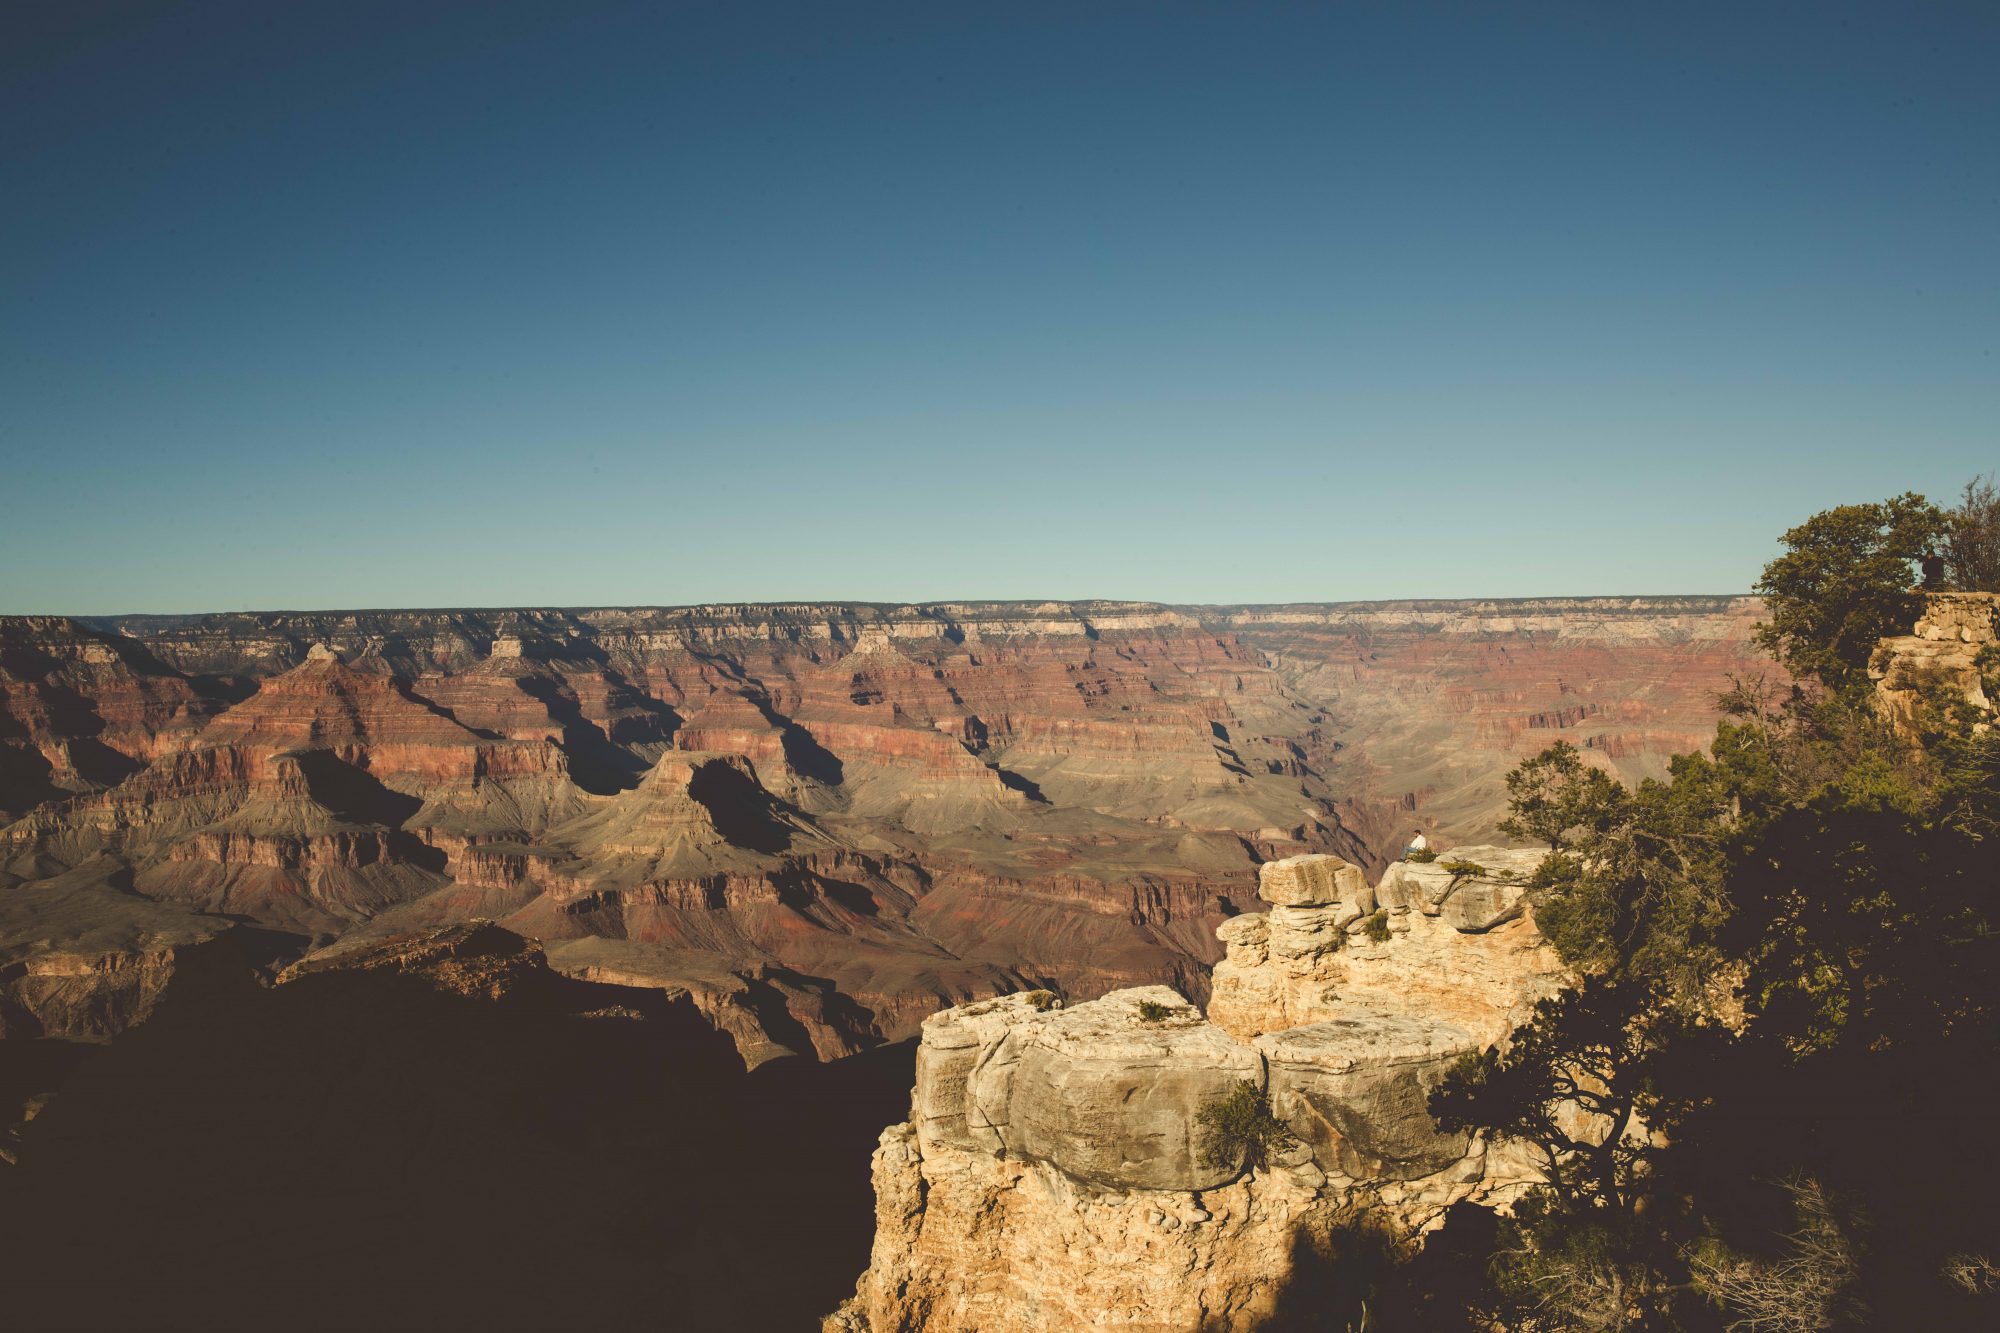 A single person sitting alone at Shoshone Point at the Grand Canyon